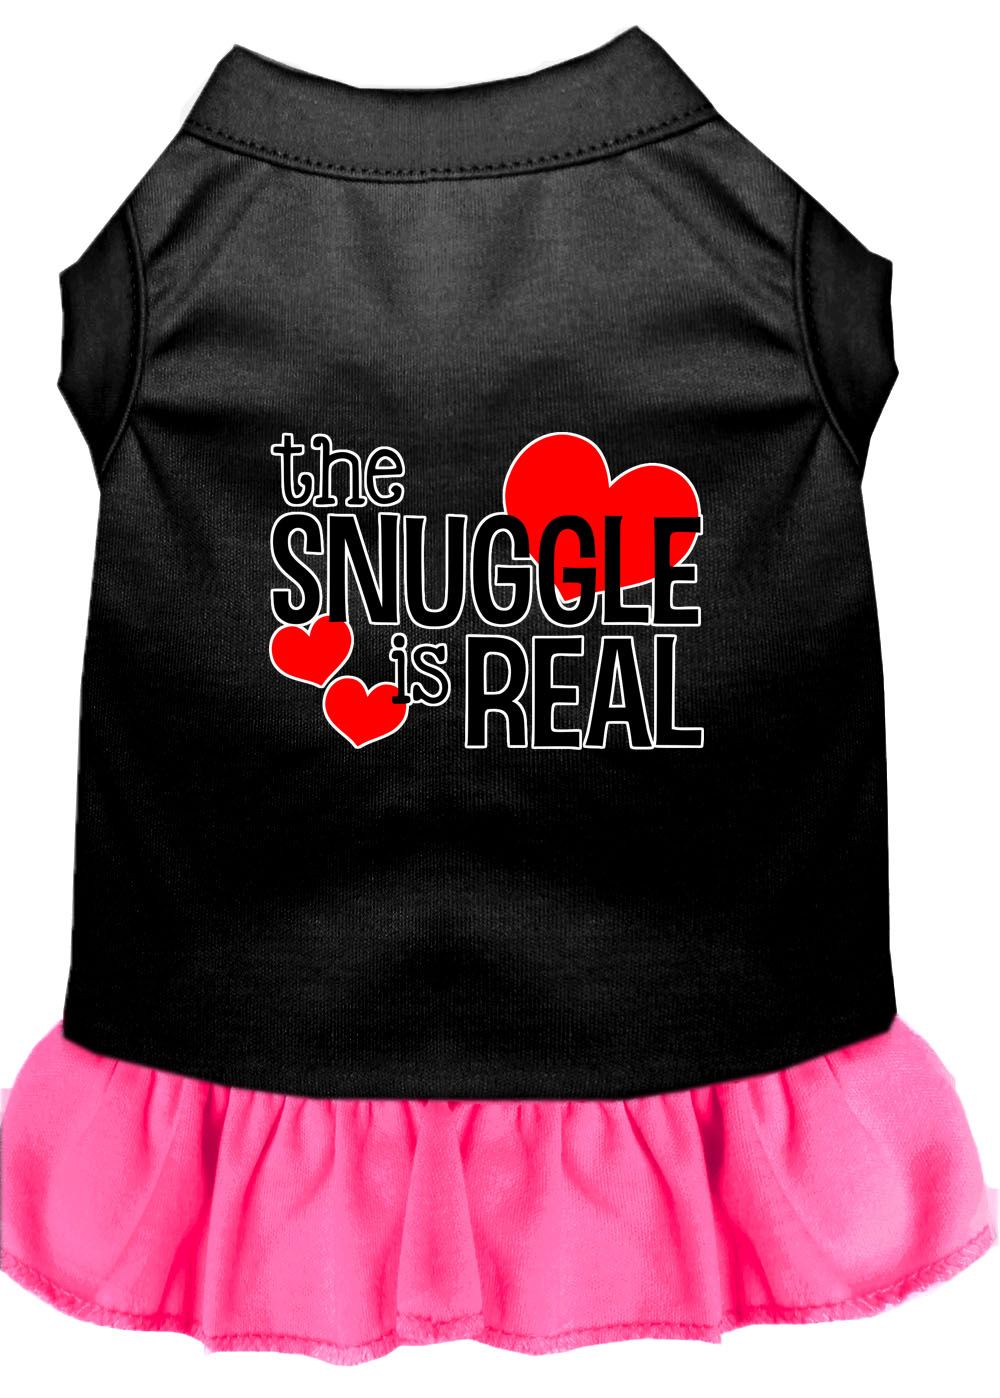 The Snuggle is Real Screen Print Dog Dress Black with Bright Pink Lg